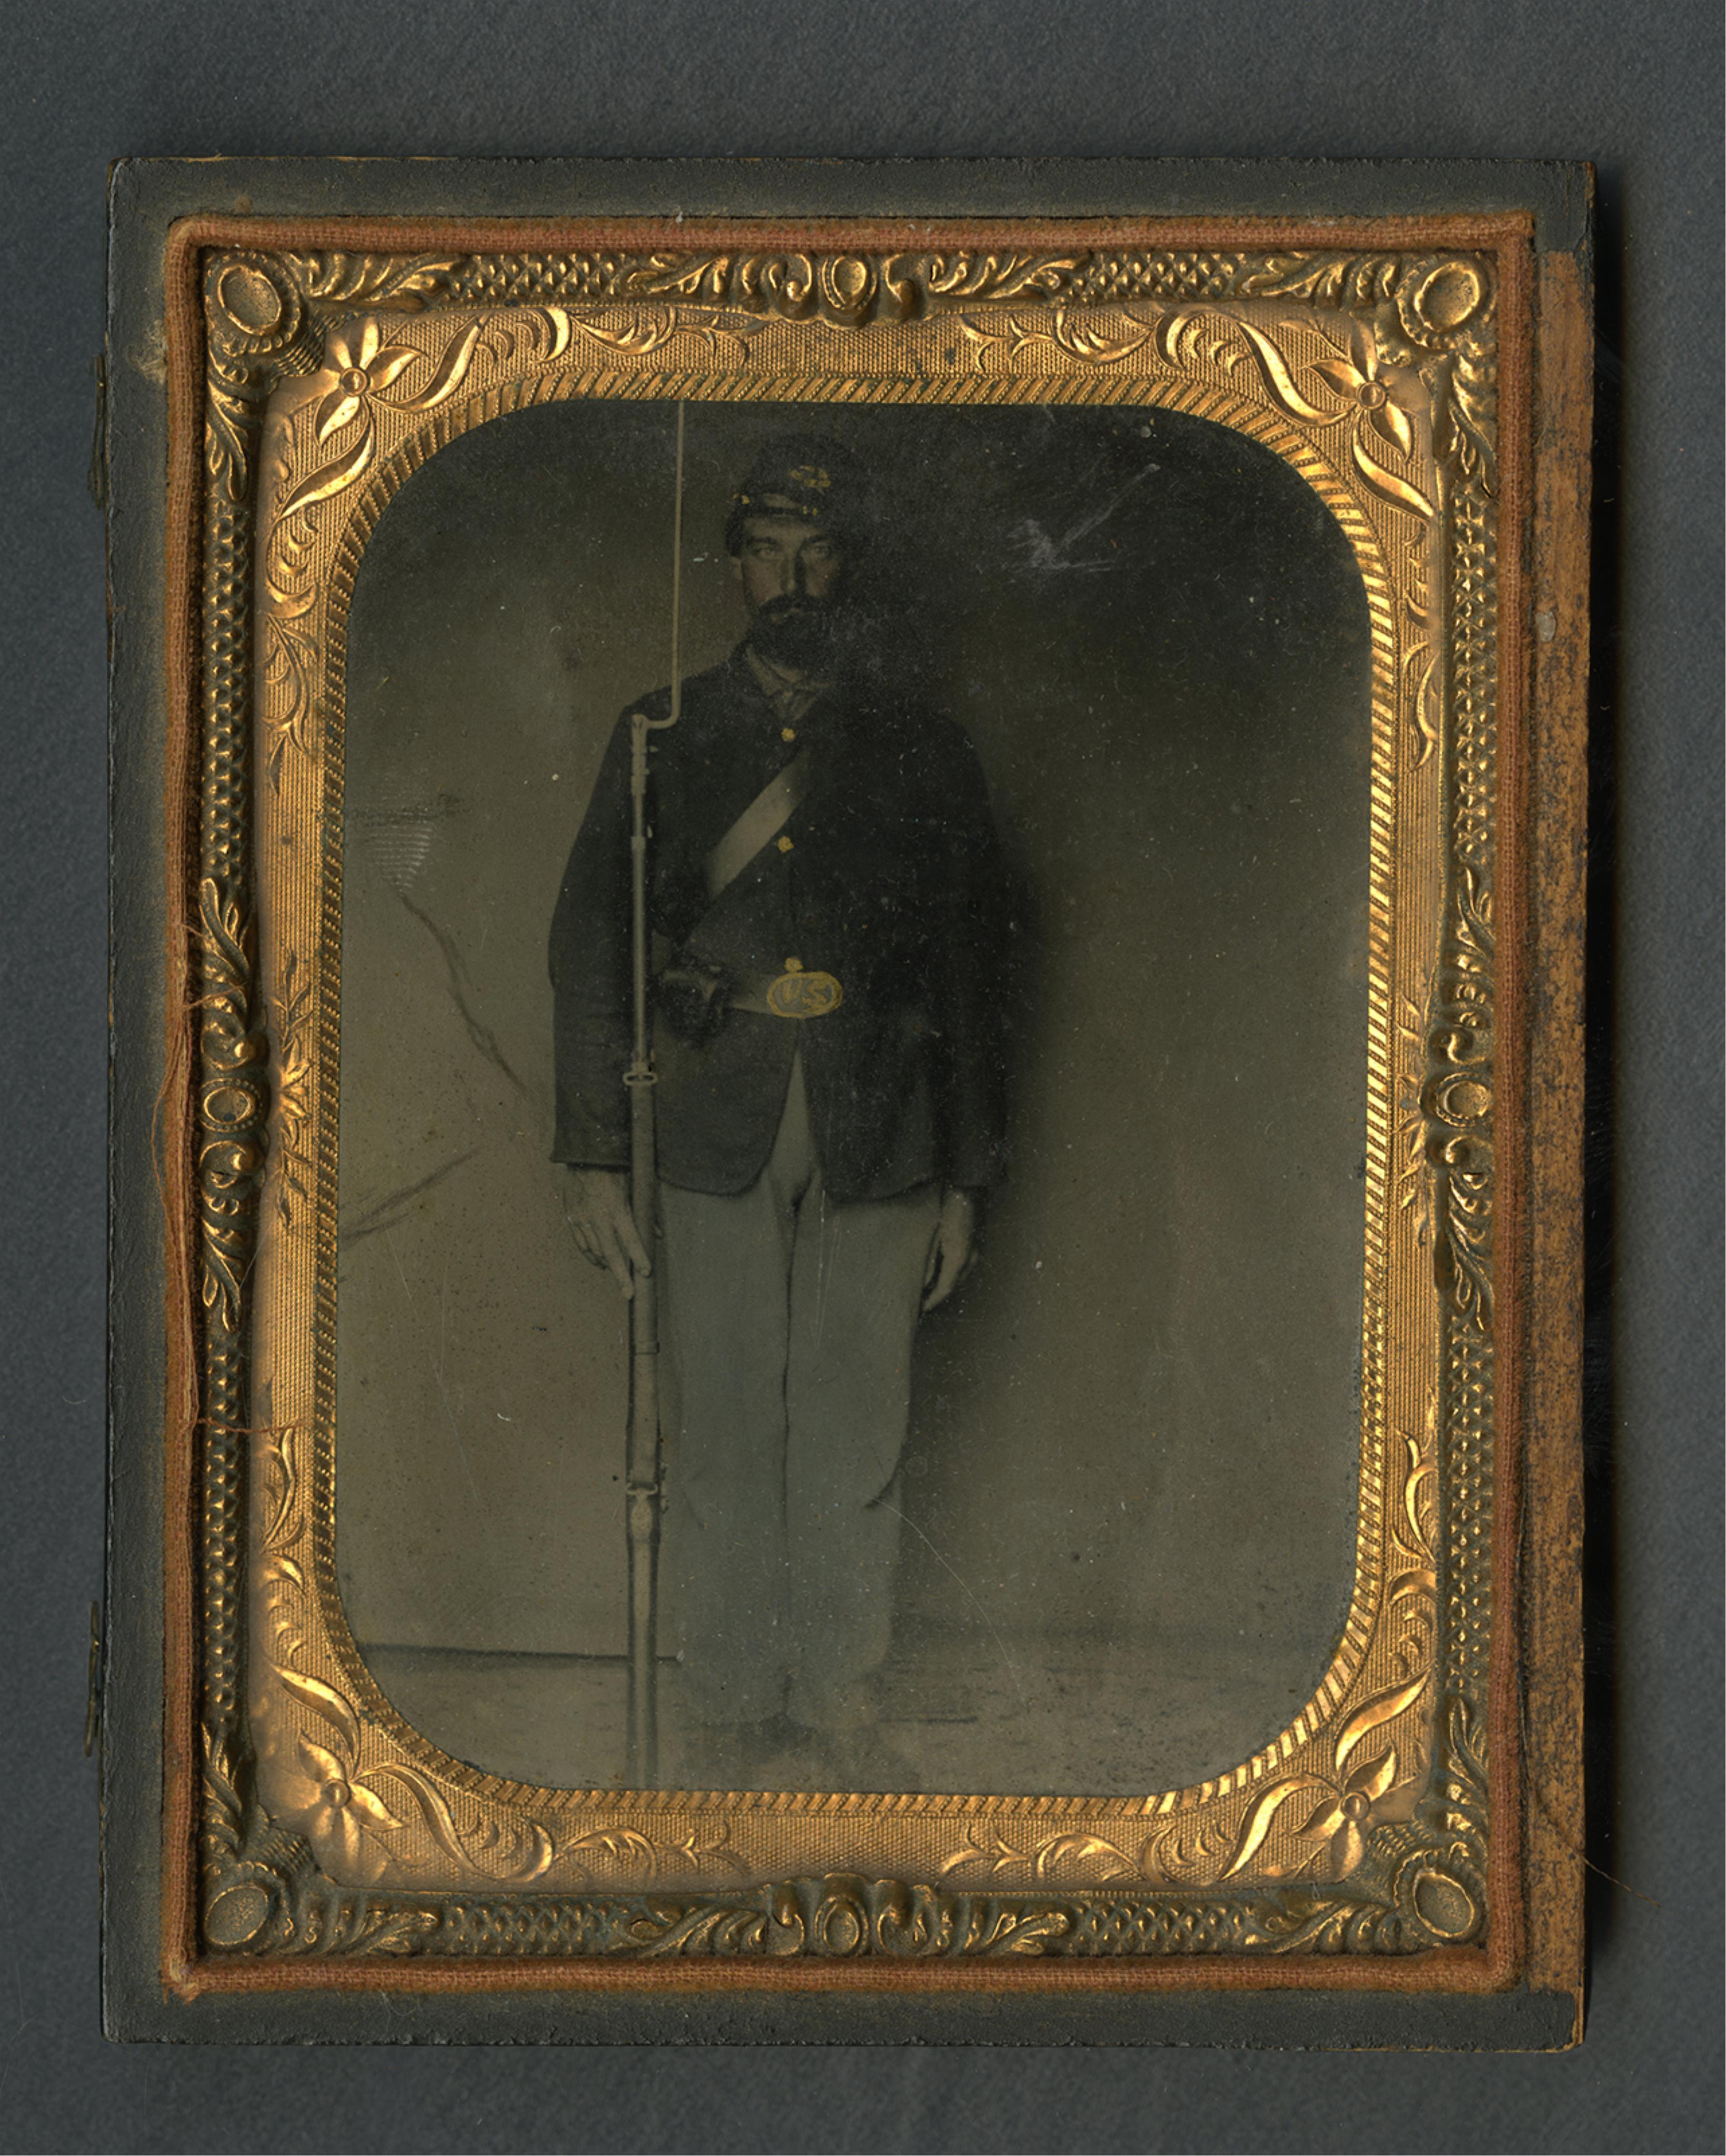 Quarter Plate Tintype of Civil War Union Solider - Image 2 of 3